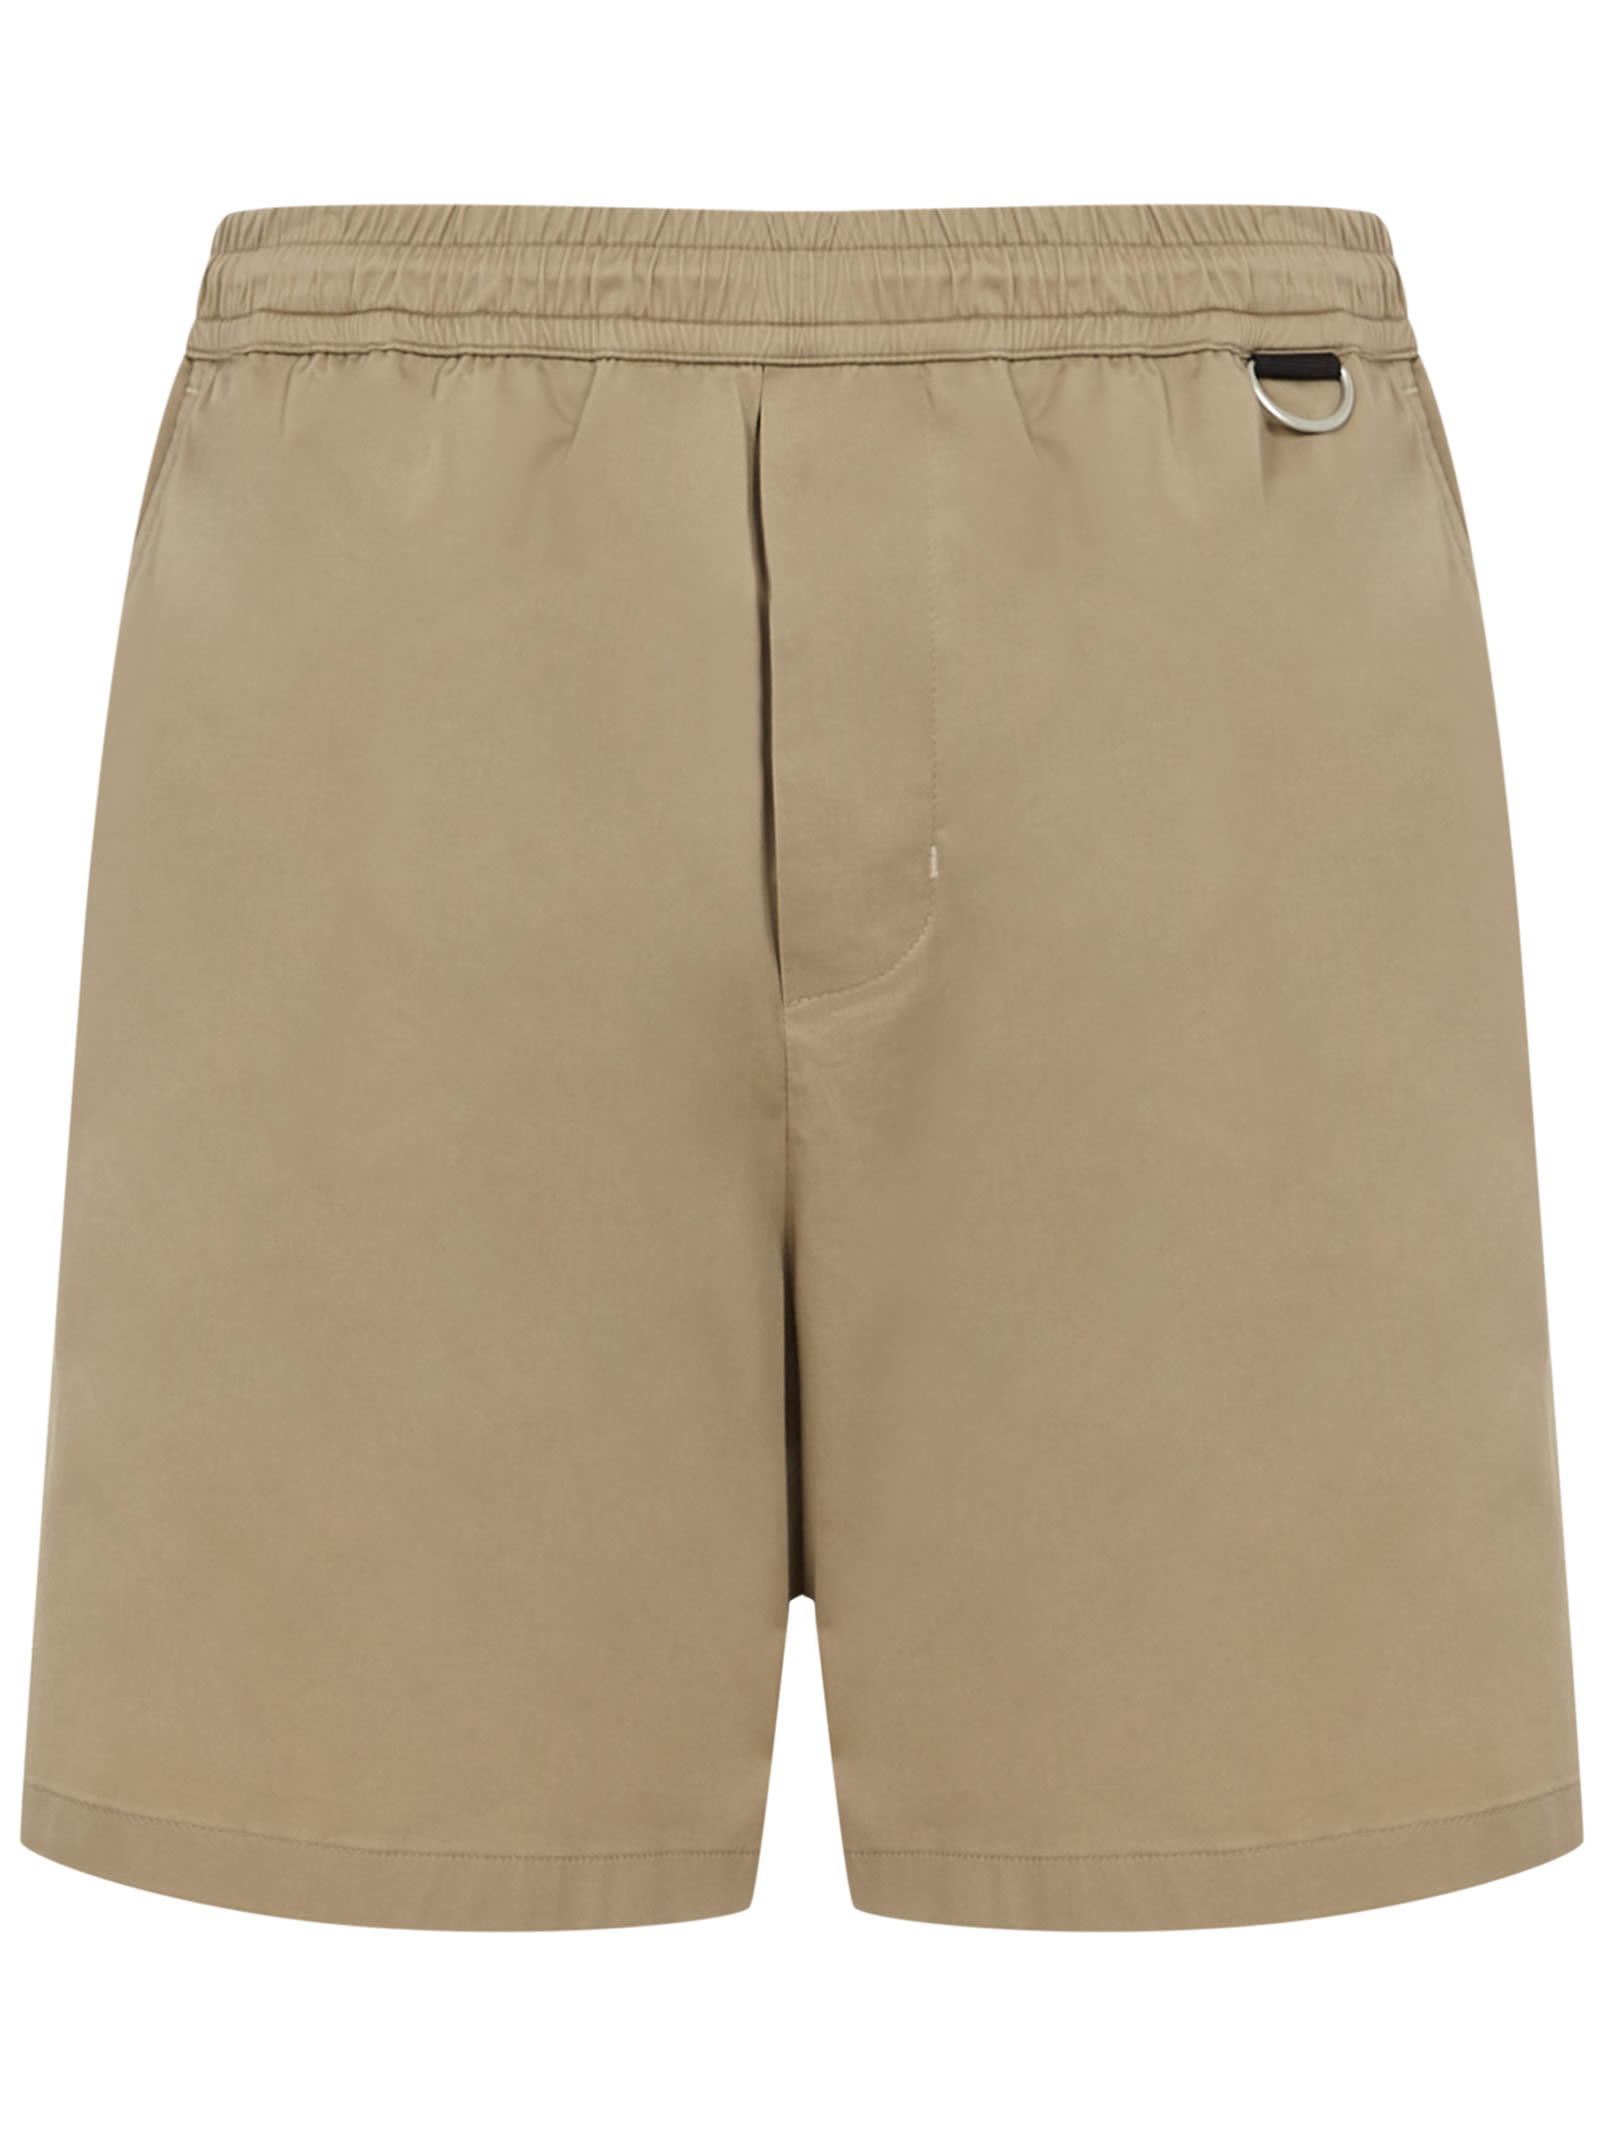 LOW BRAND SHORTS,L1PSS215724 A029